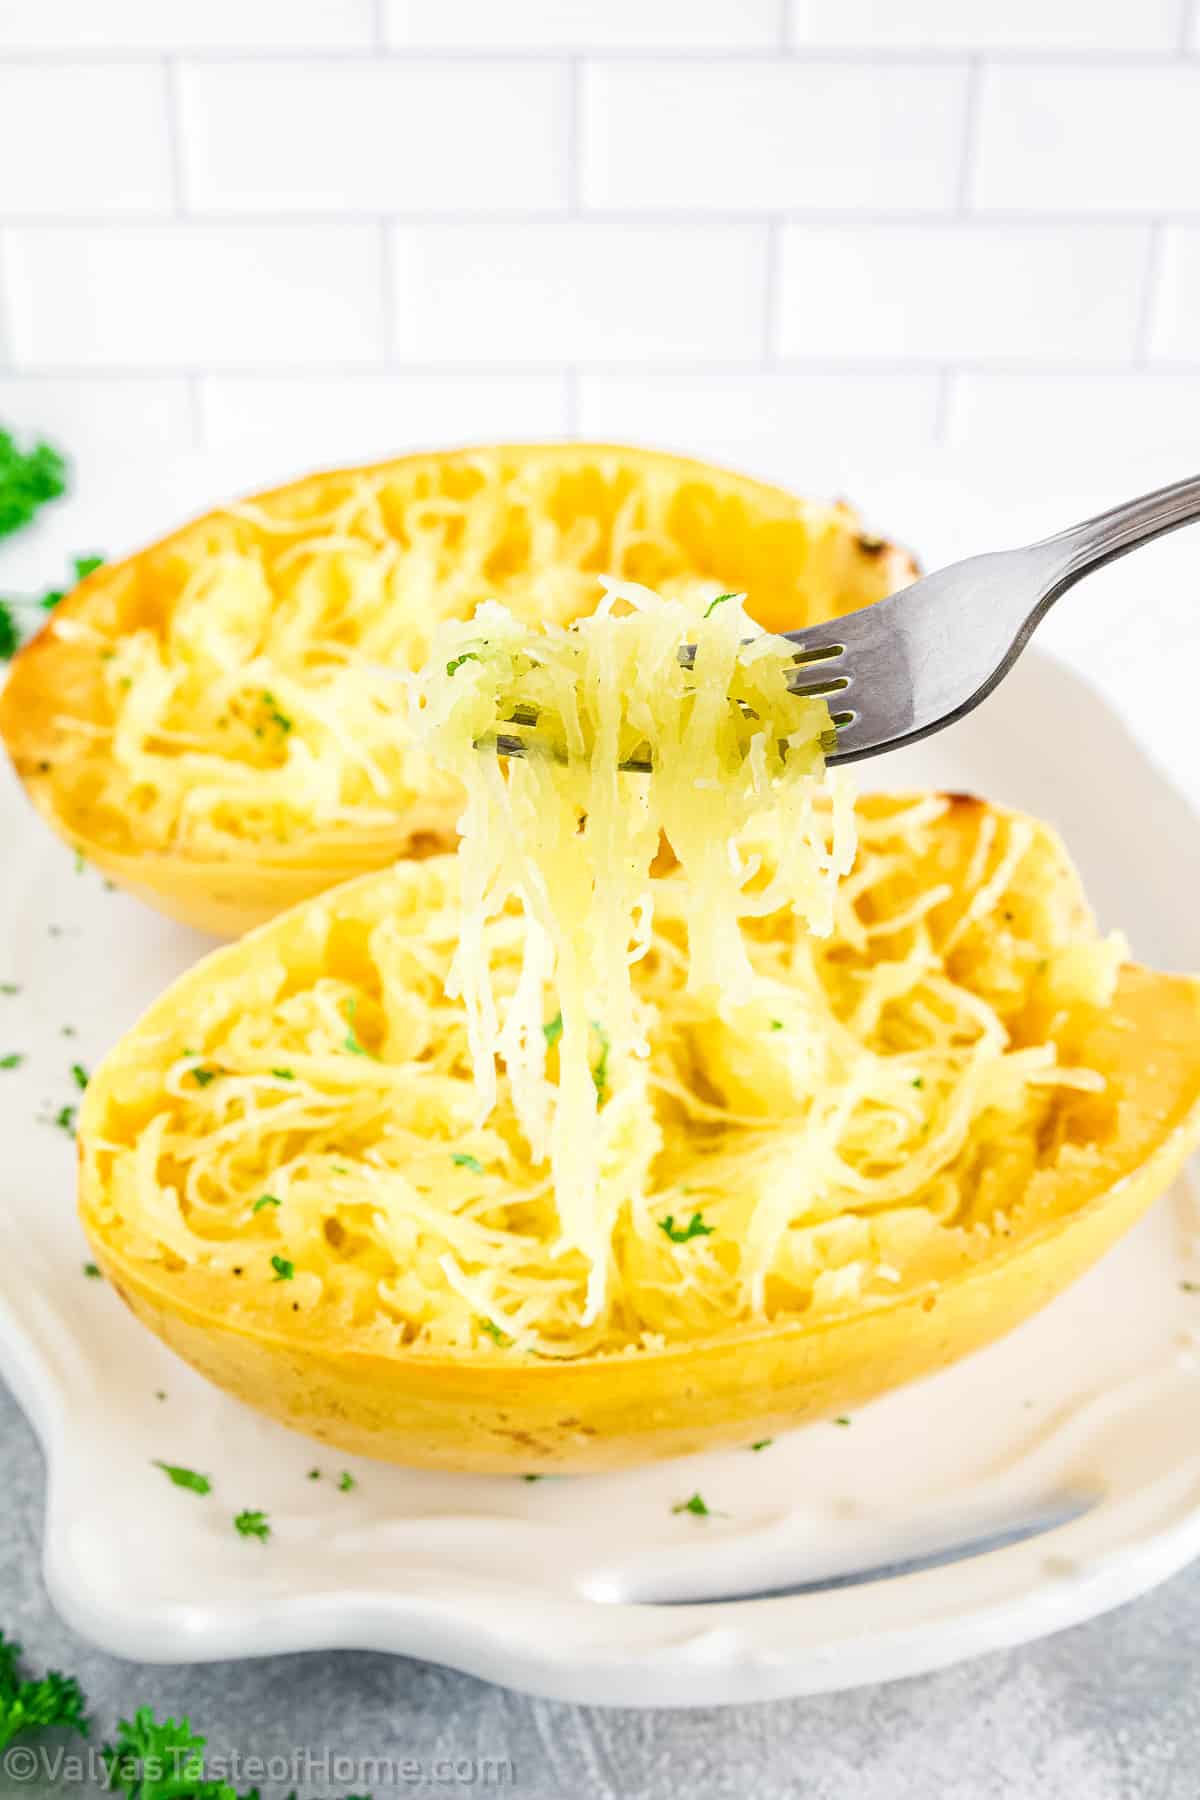 Whether you want to enjoy it as a side dish or incorporate it into your main course, this spaghetti squash is sure to impress.